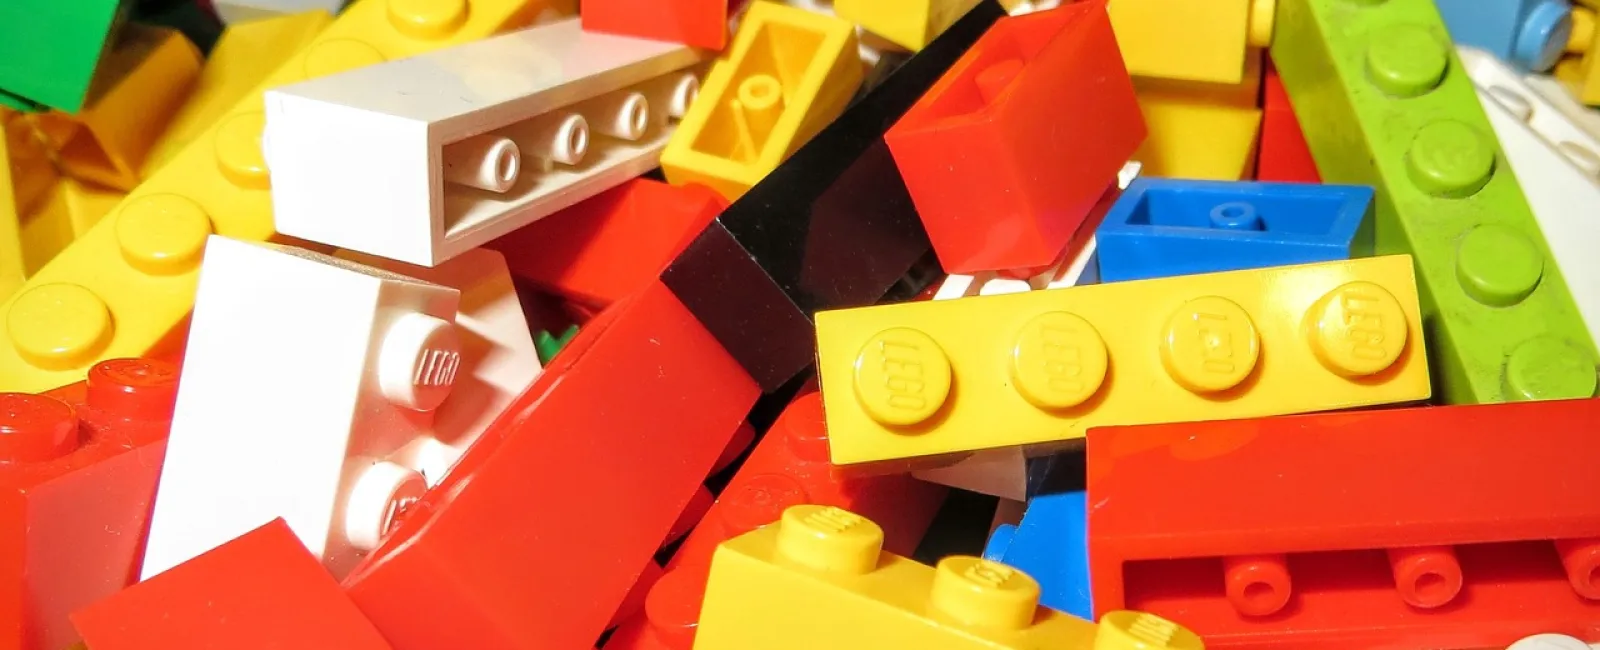 a pile of colorful blocks